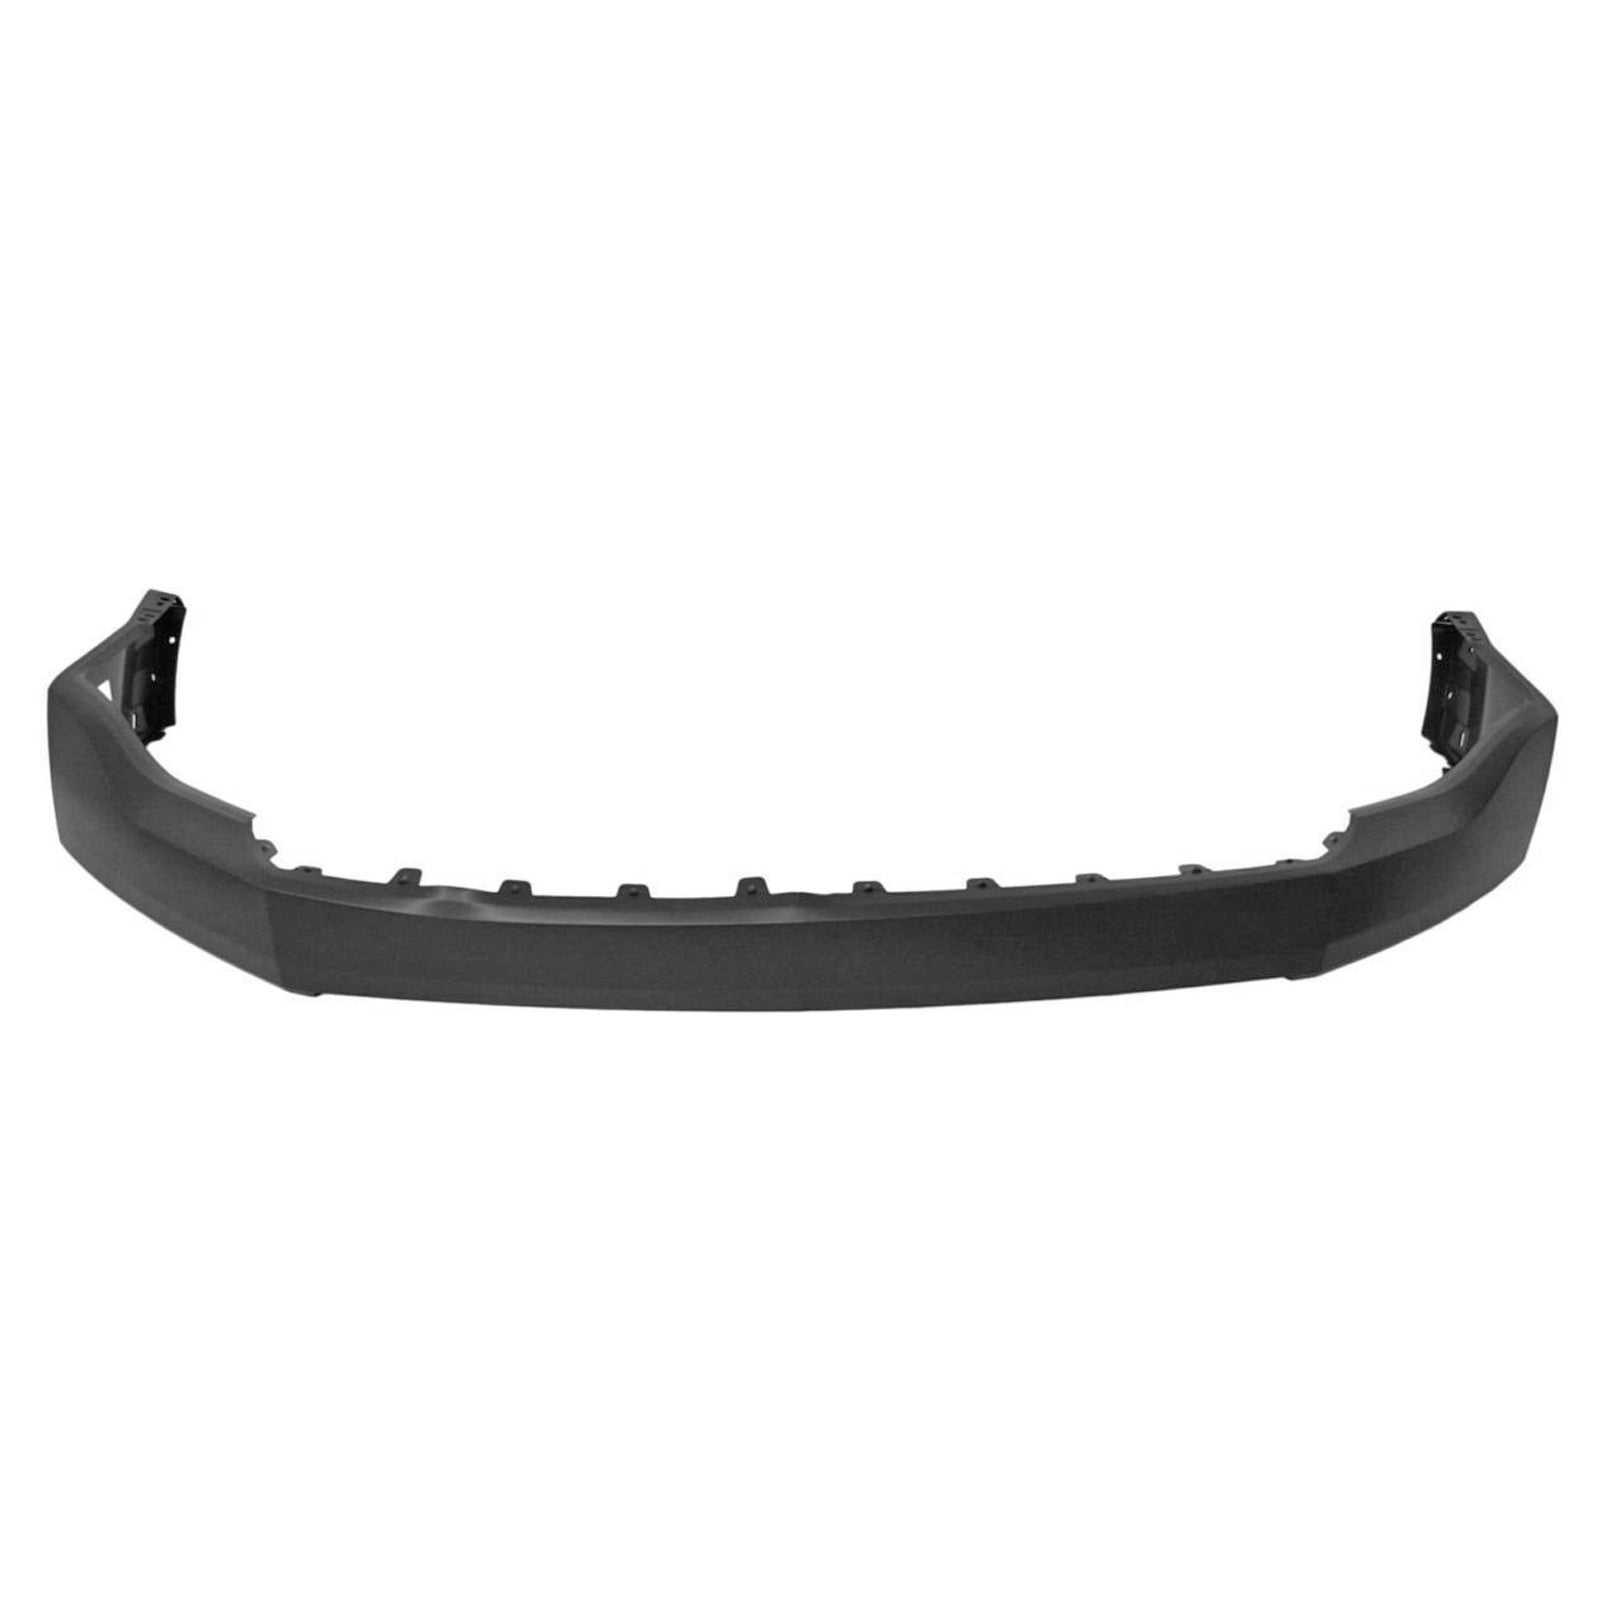 Ford Expedition 2007 - 2014 Front Upper Bumper Cover 07 - 14 FO1014104 Bumper-King